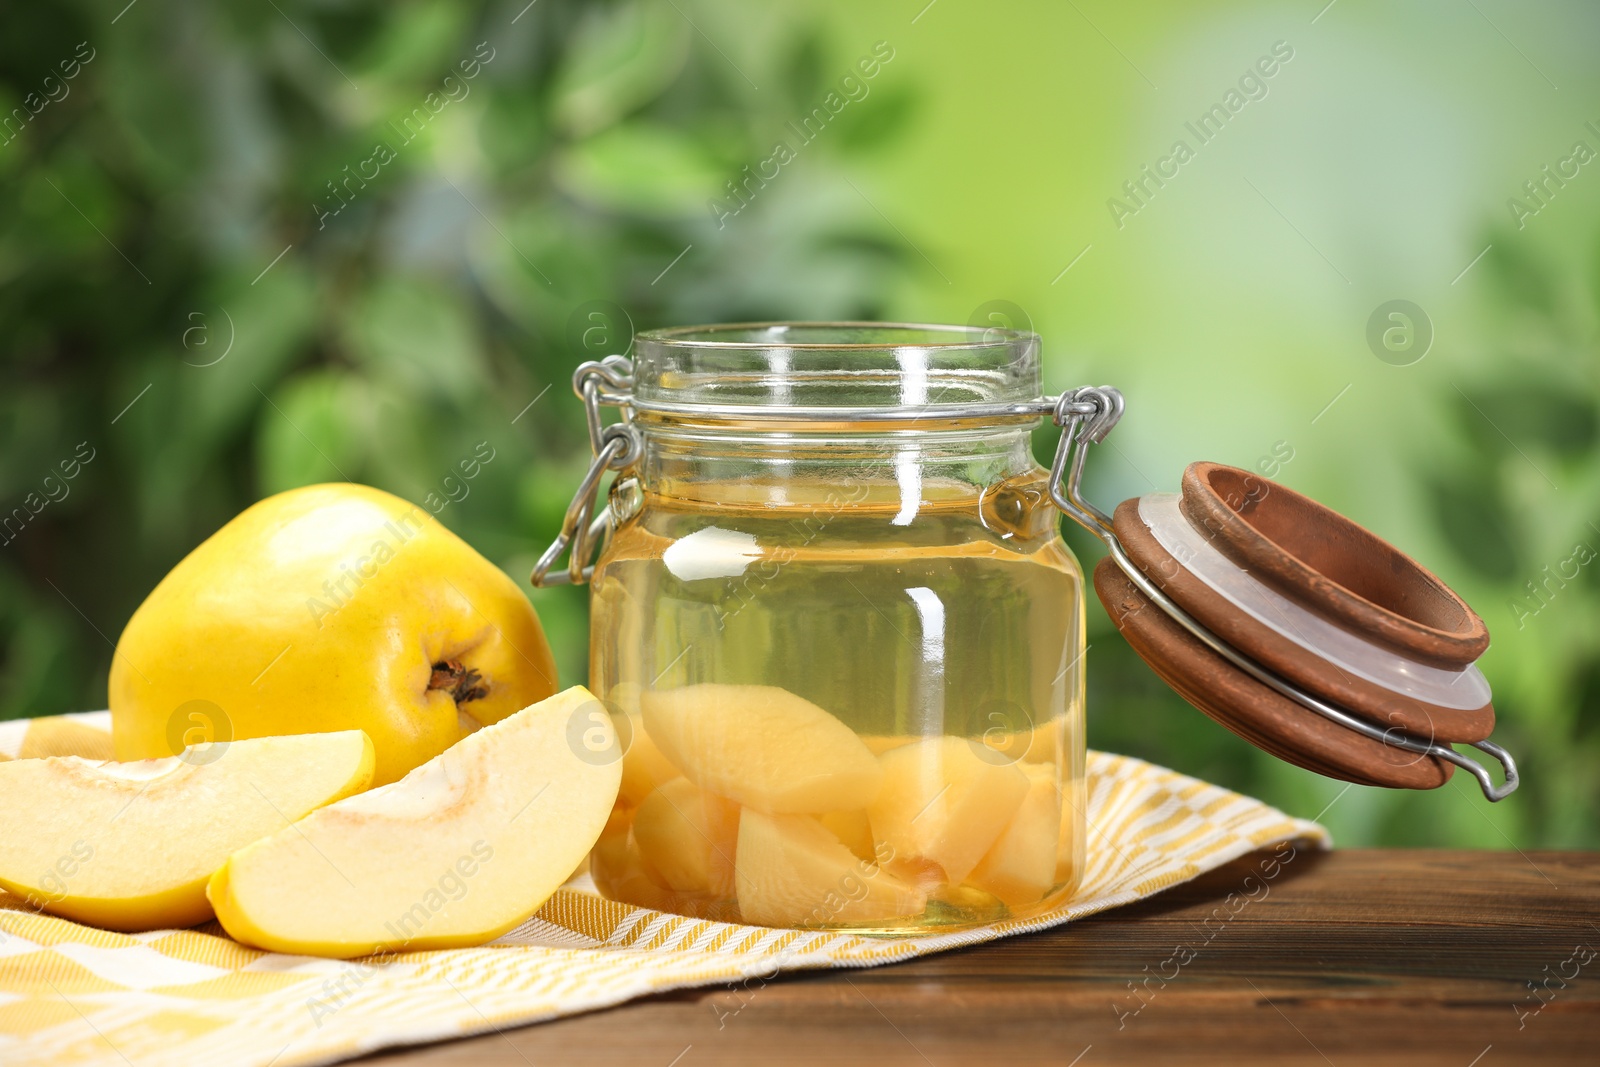 Photo of Delicious quince drink and fresh fruits on wooden table against blurred background